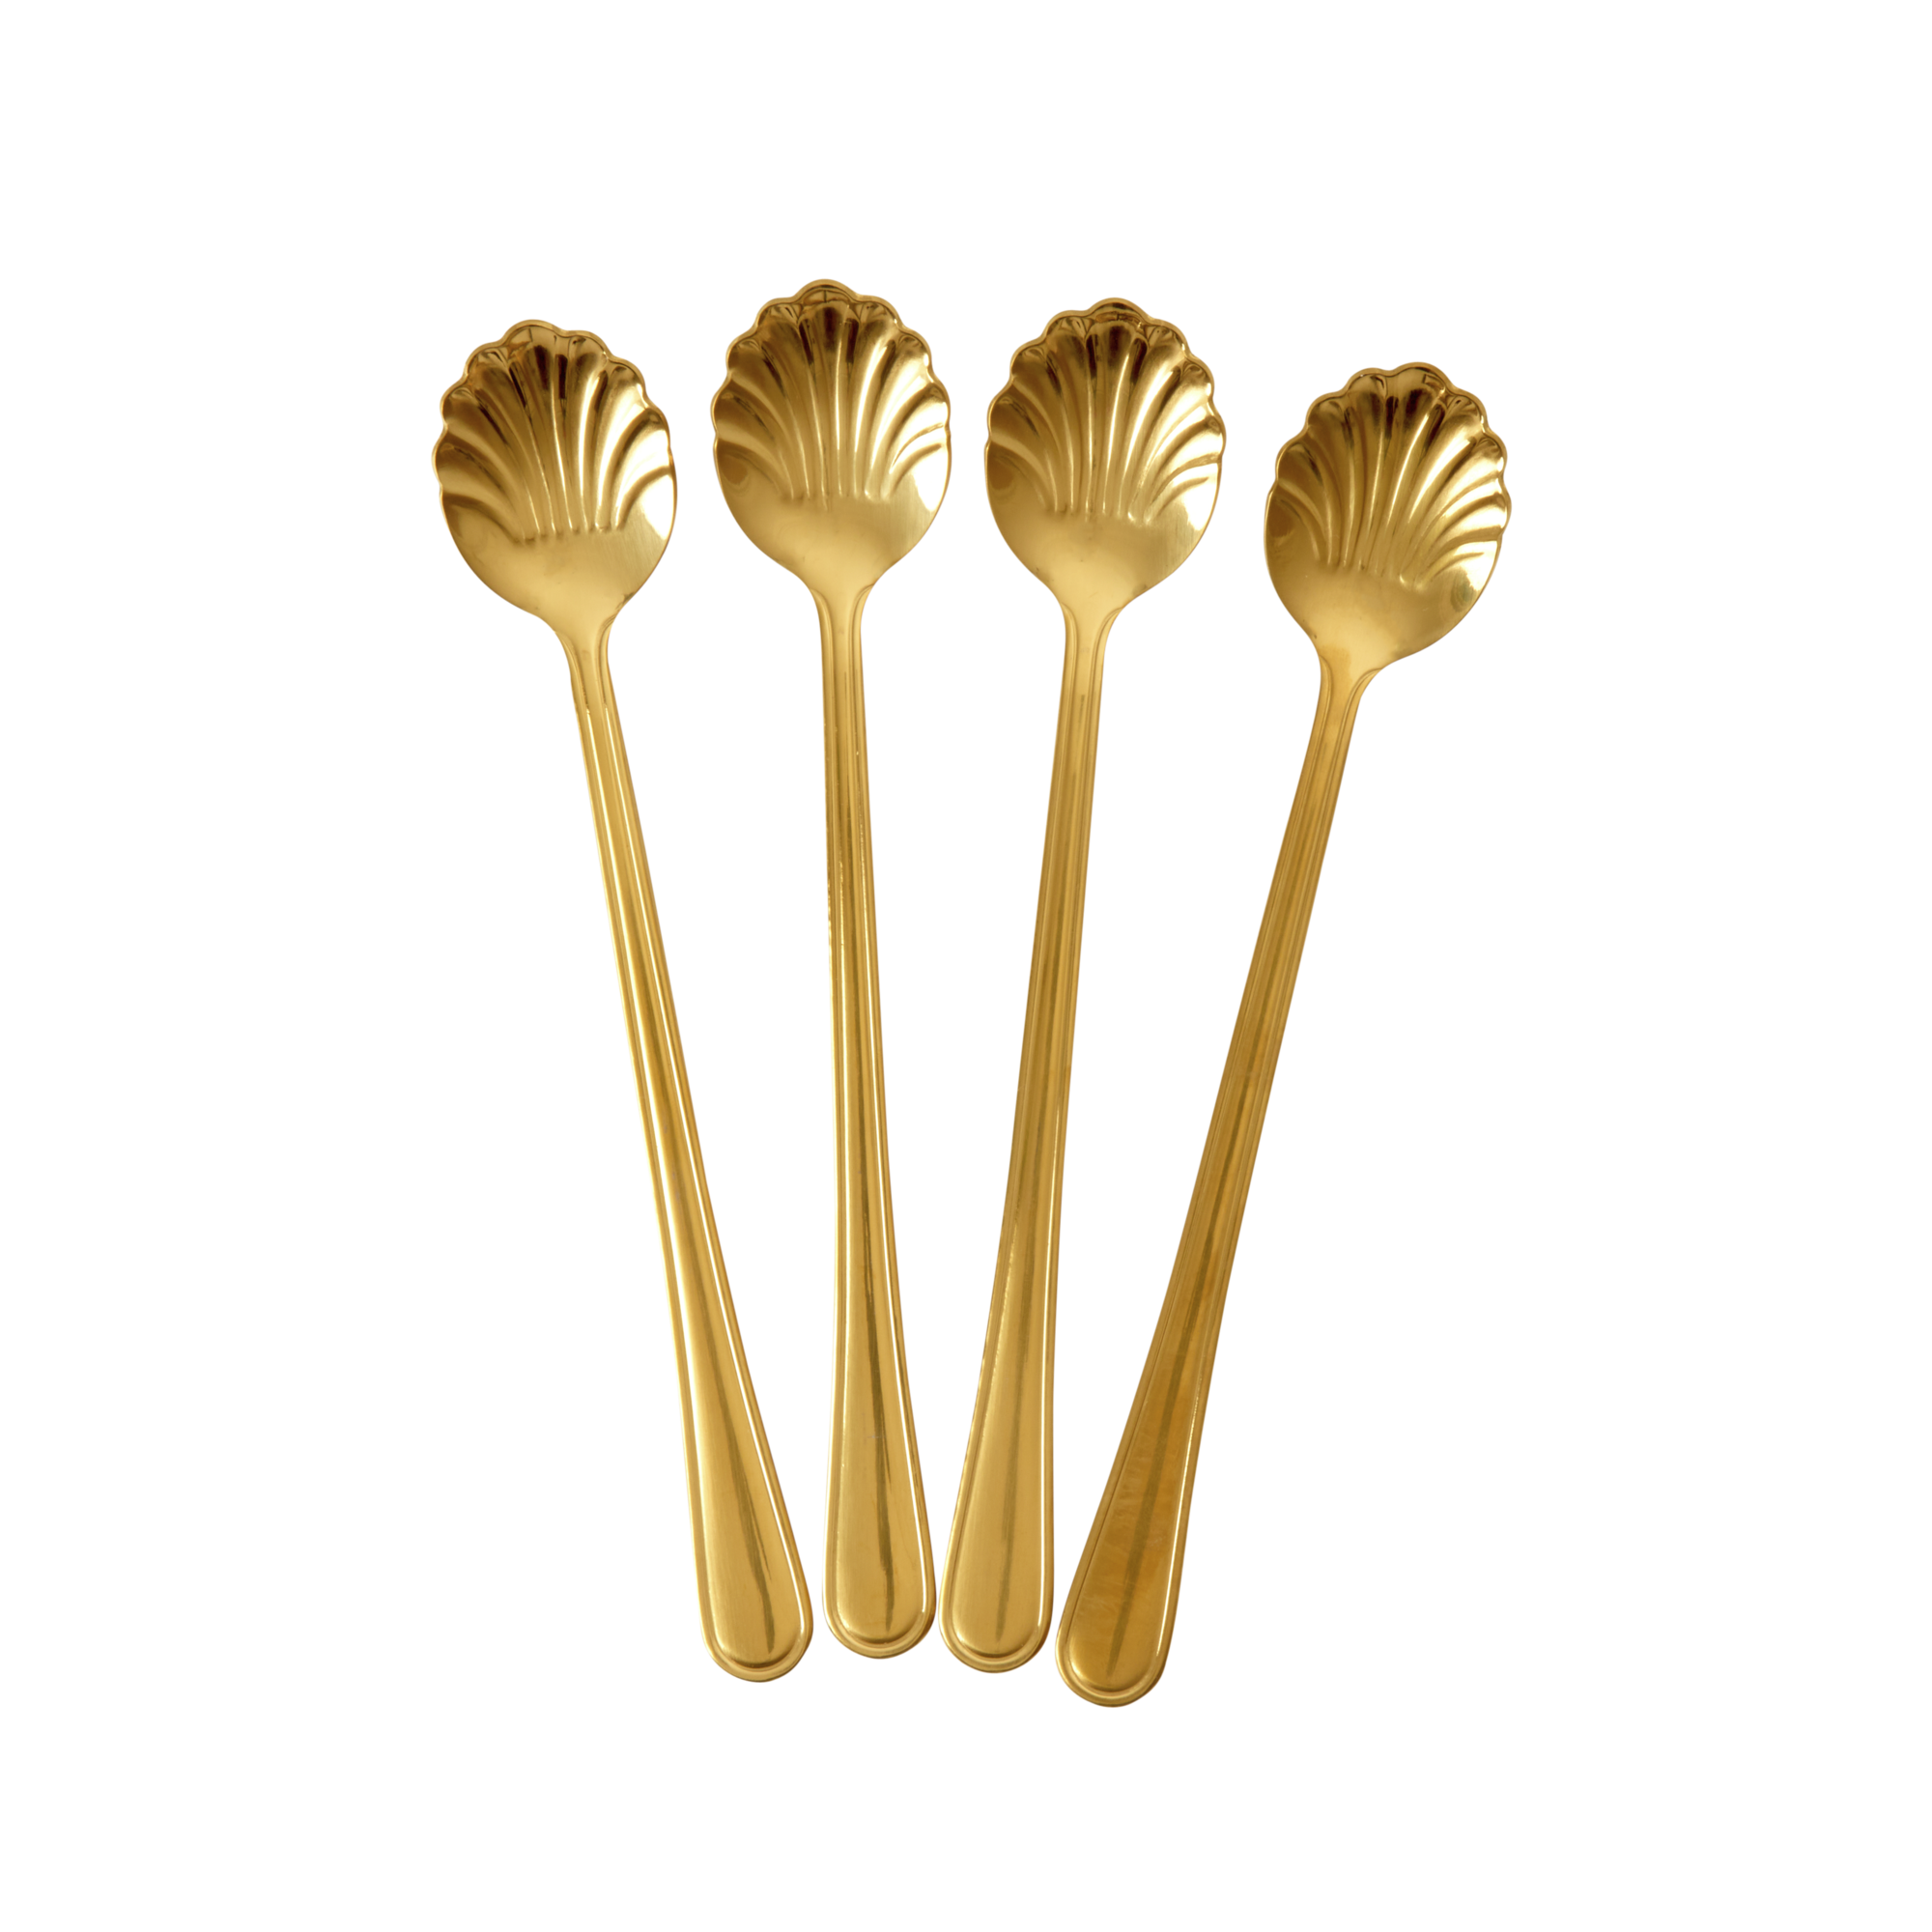 Rice - Stainless Steel Seashell Latte Spoon Set of 4 - Gold